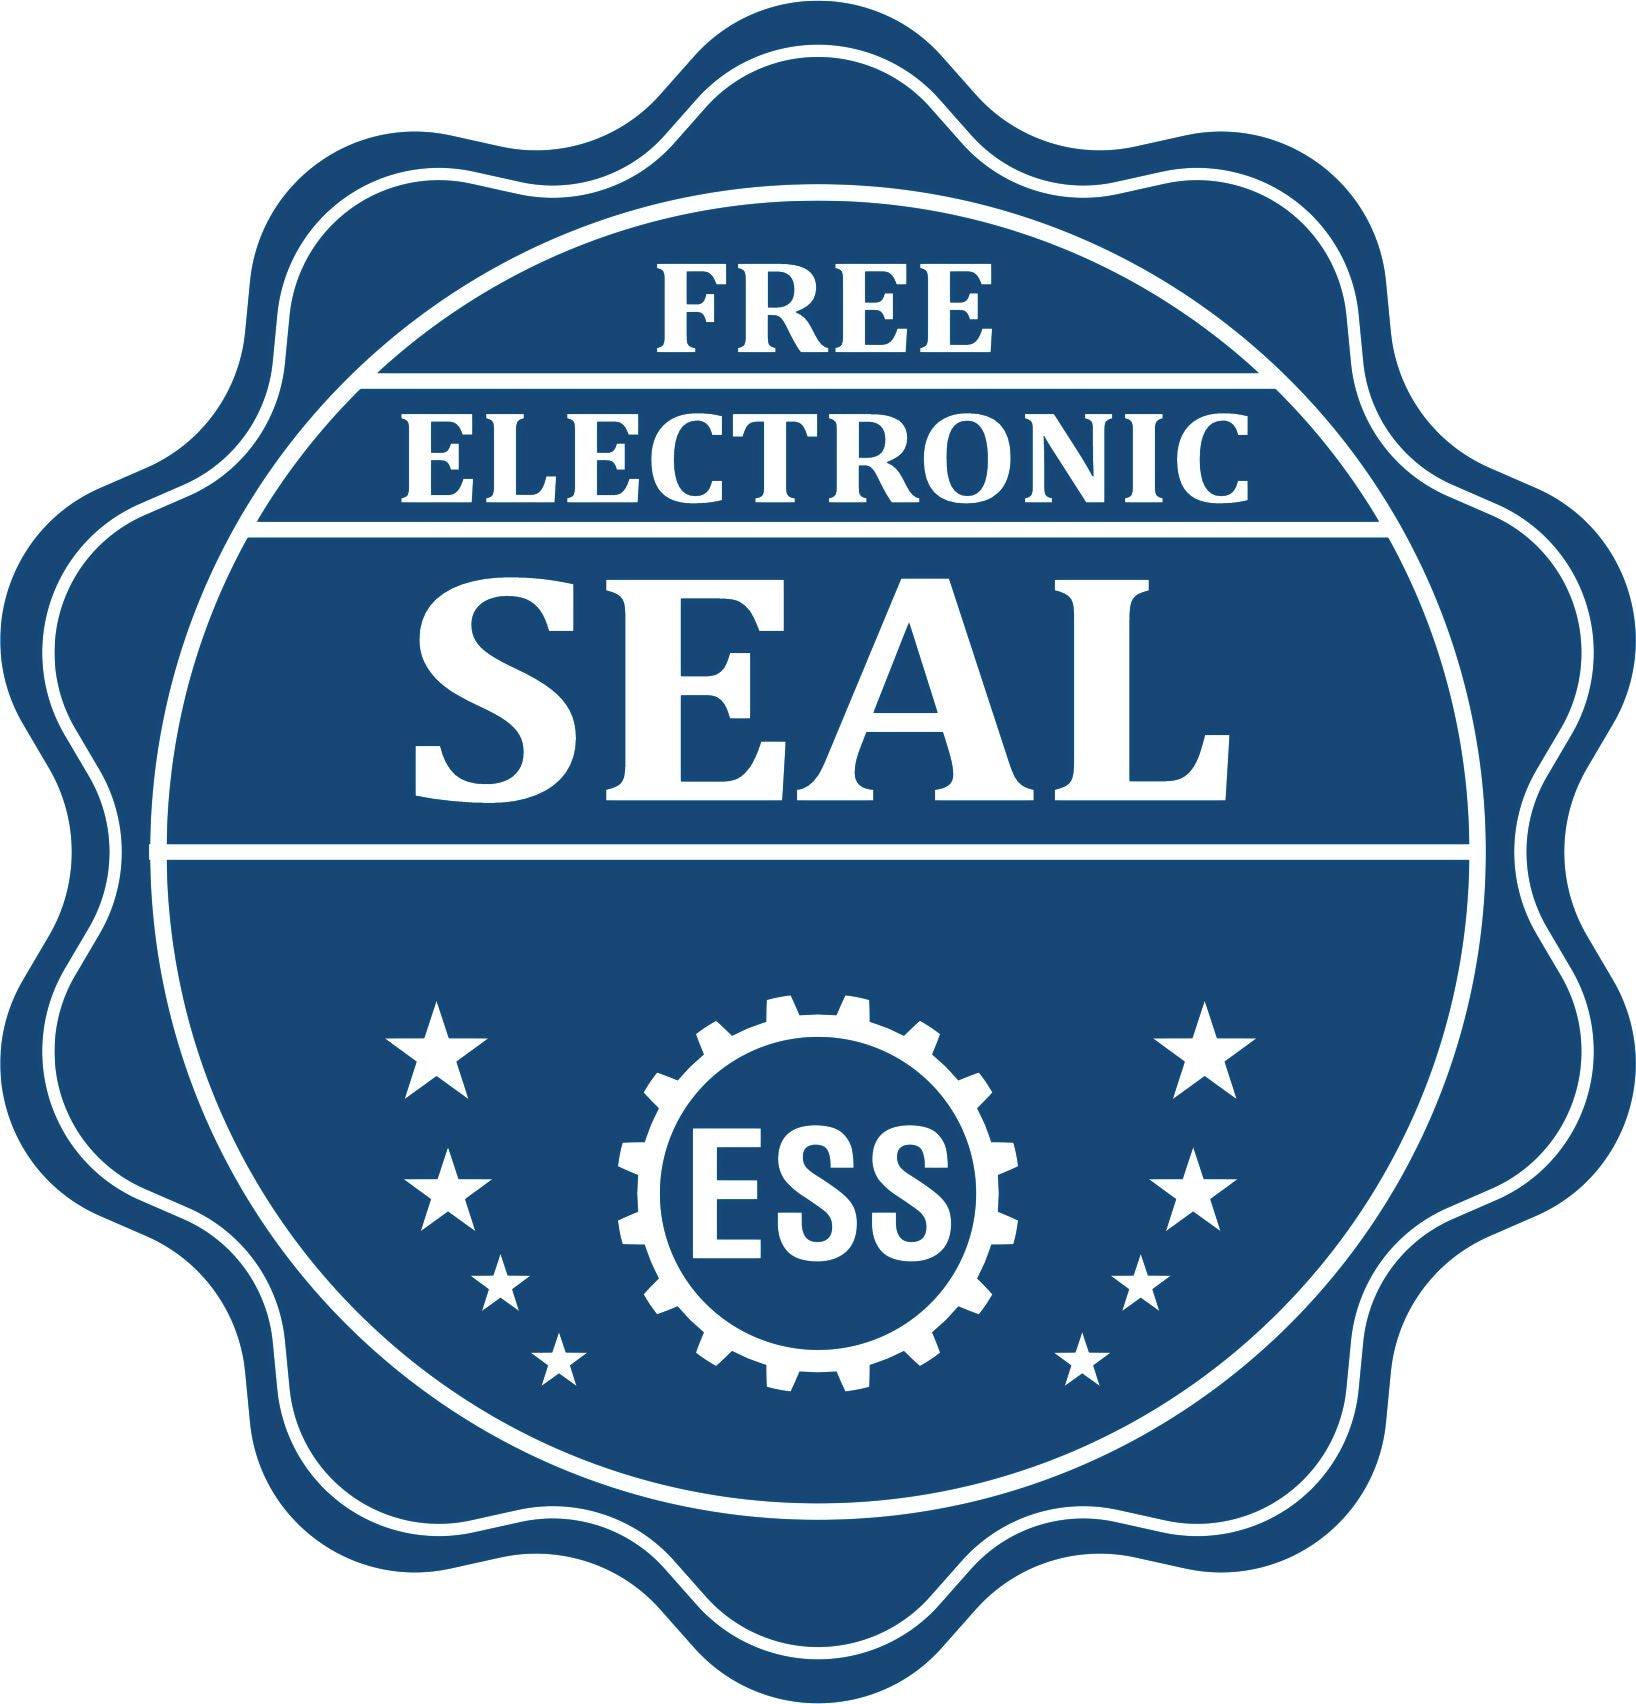 A badge showing a free electronic seal for the State of Utah Architectural Seal Embosser with stars and the ESS gear on the emblem.